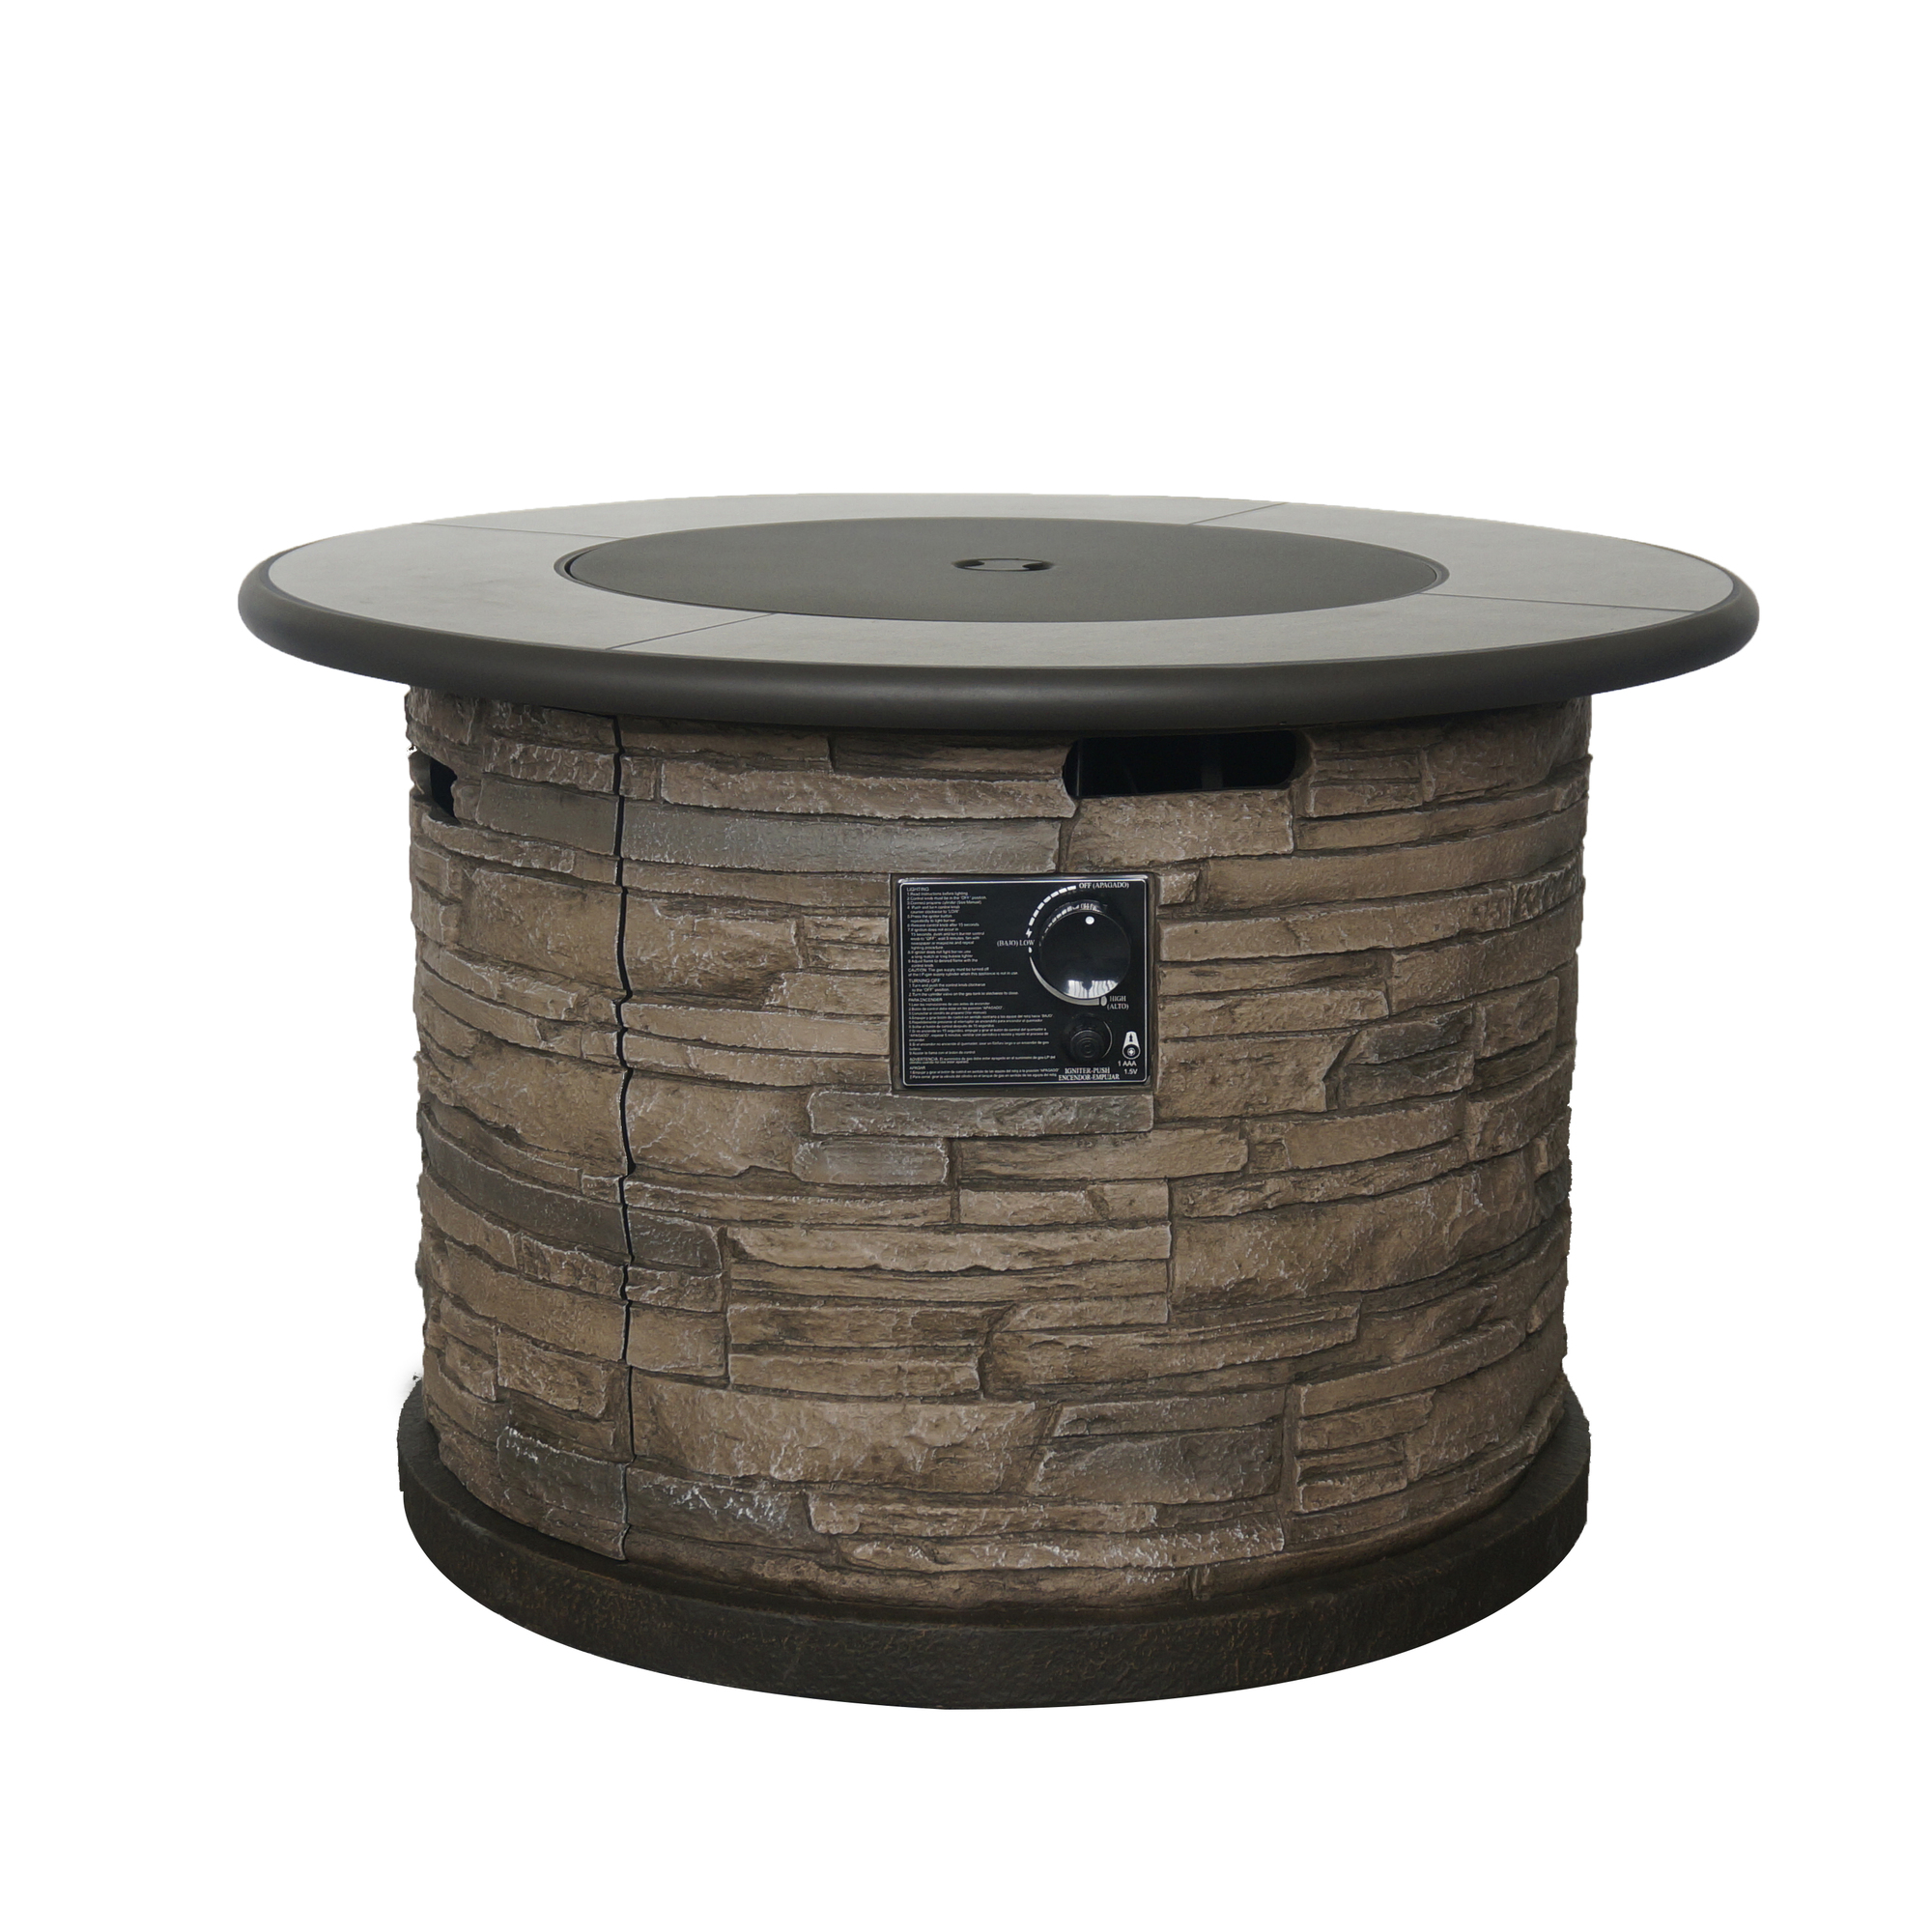 Bond, Newcastle 36Inch Round Fire Pit, Fuel Type Propane, Diameter 36 in, Material Magnesium, Model 52141